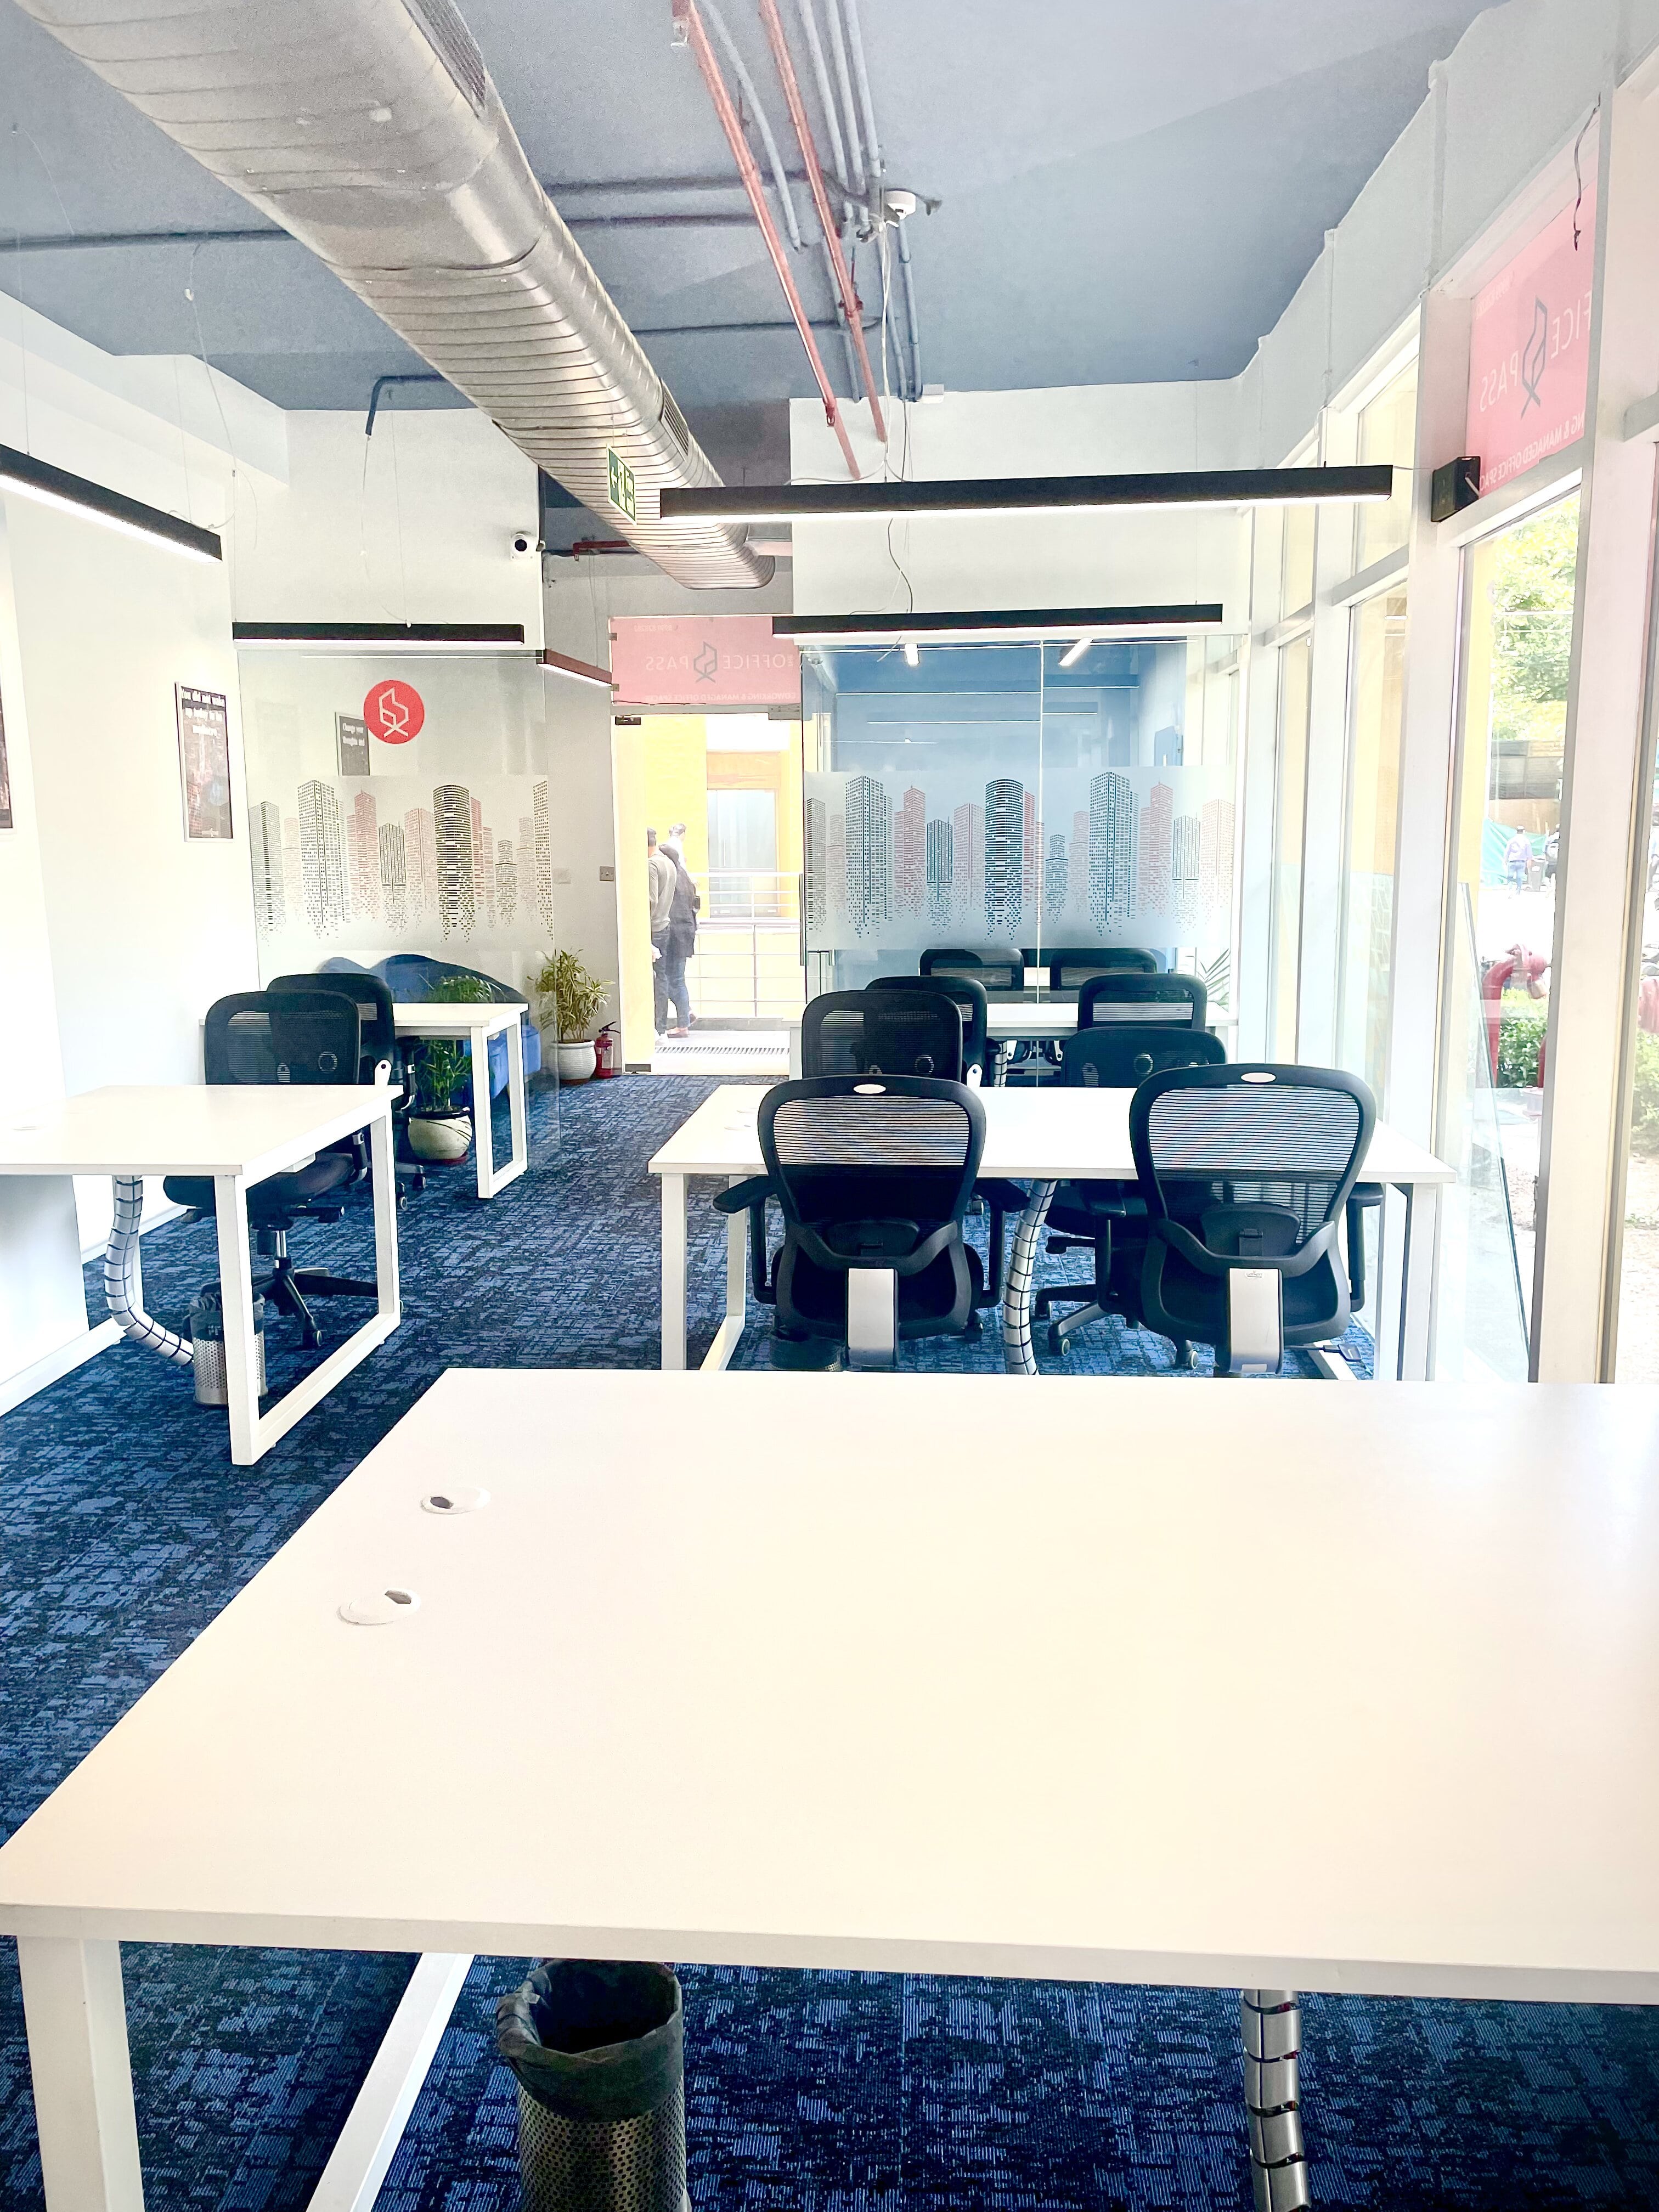 5 Reasons Why Is it a Good Idea to Work in Coworking Spaces?